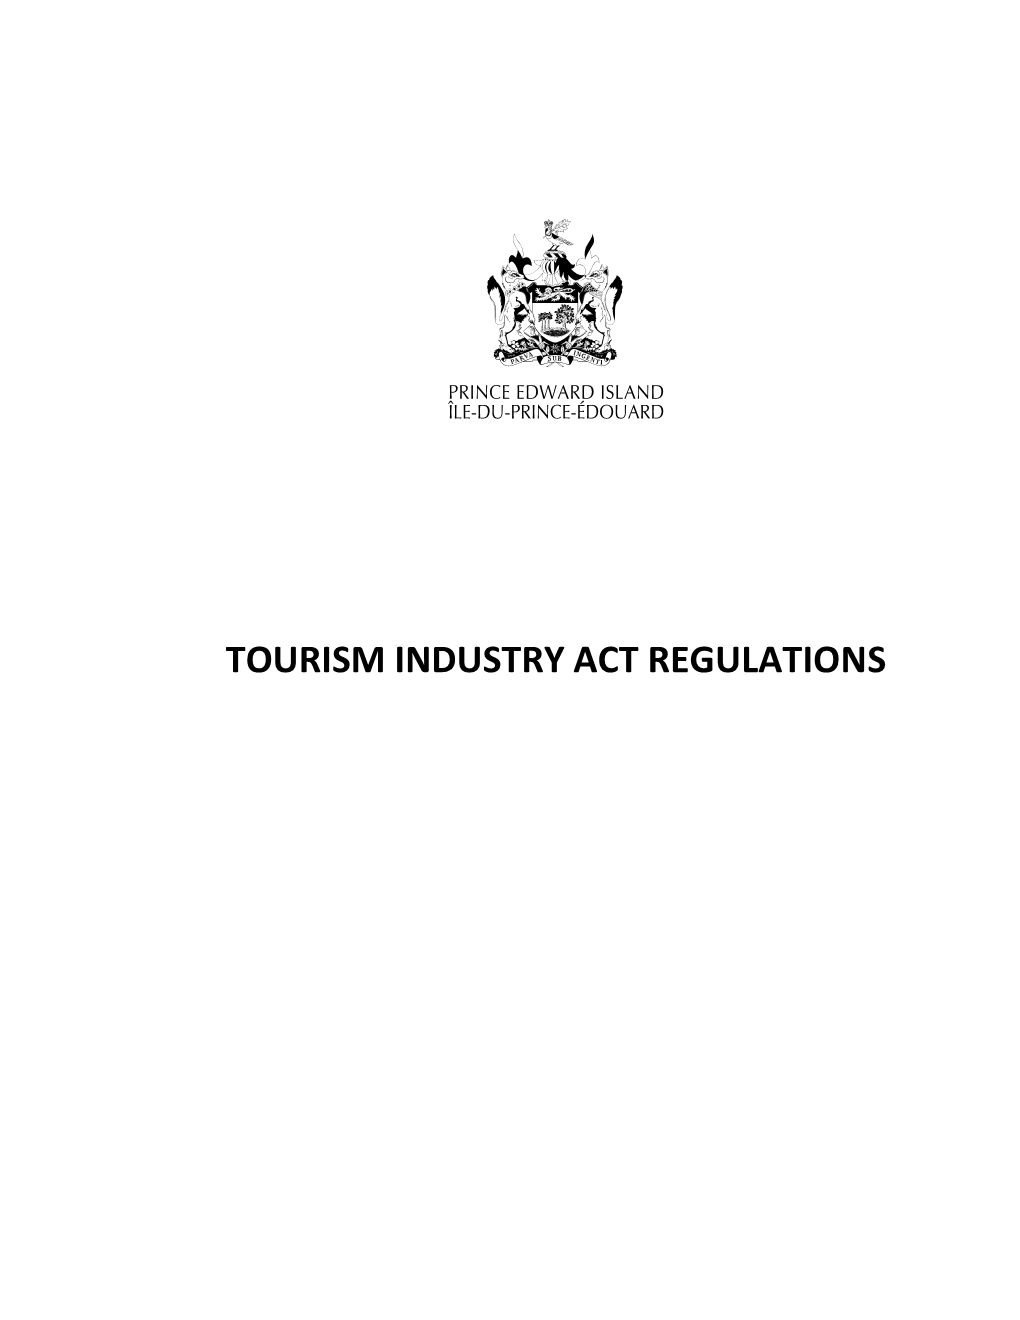 Tourism Industry Act Regulations